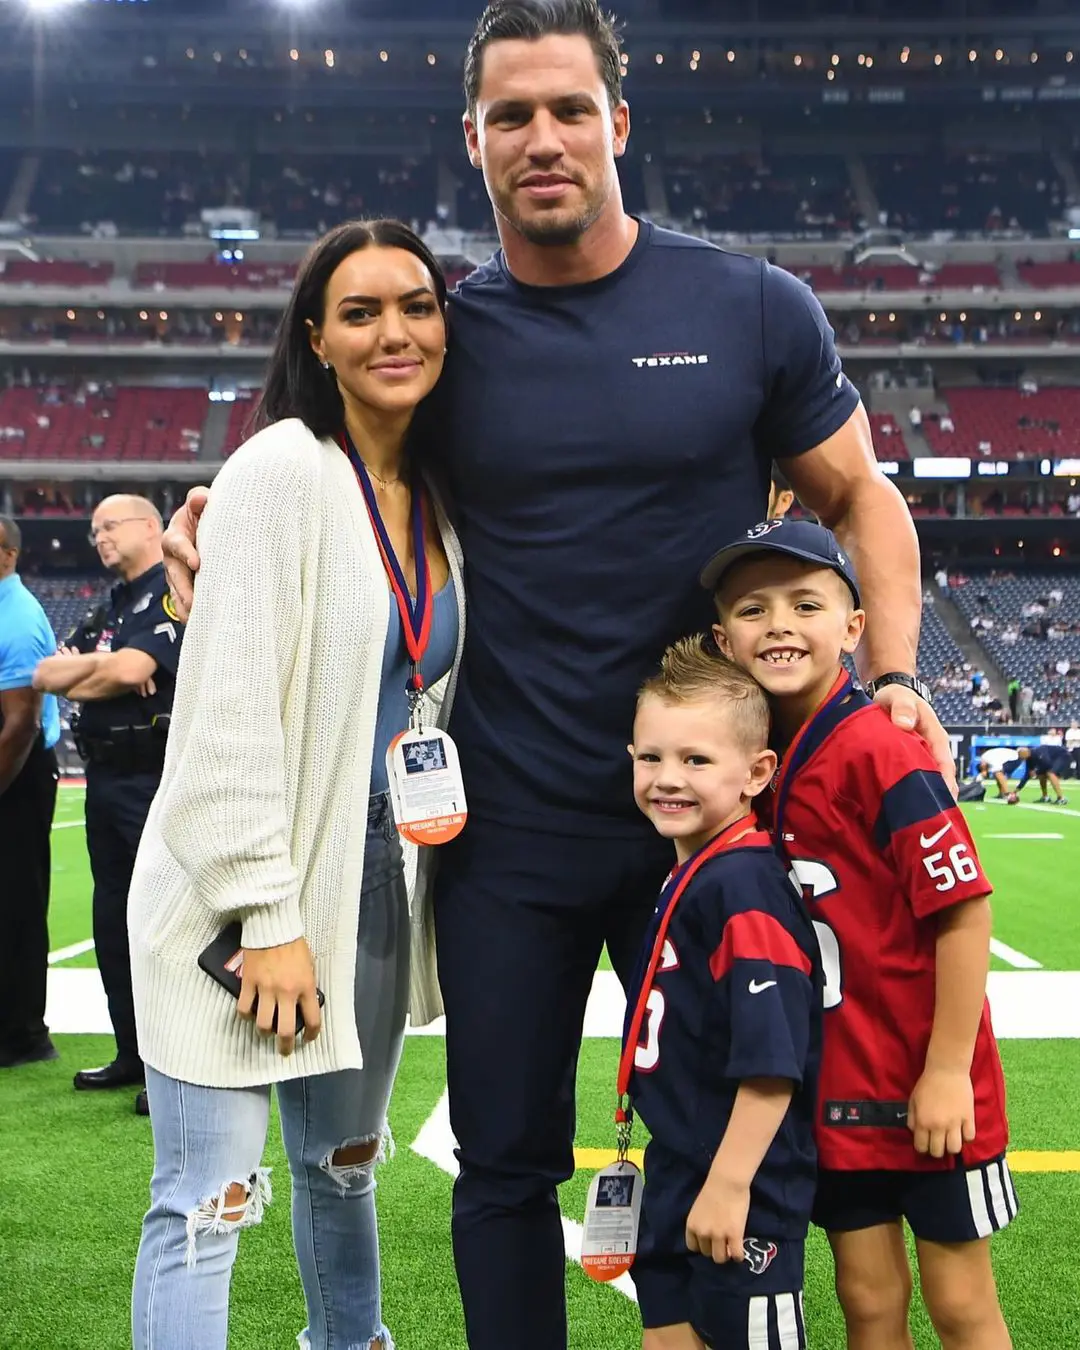 Brian and Megan with their children in the football field. 